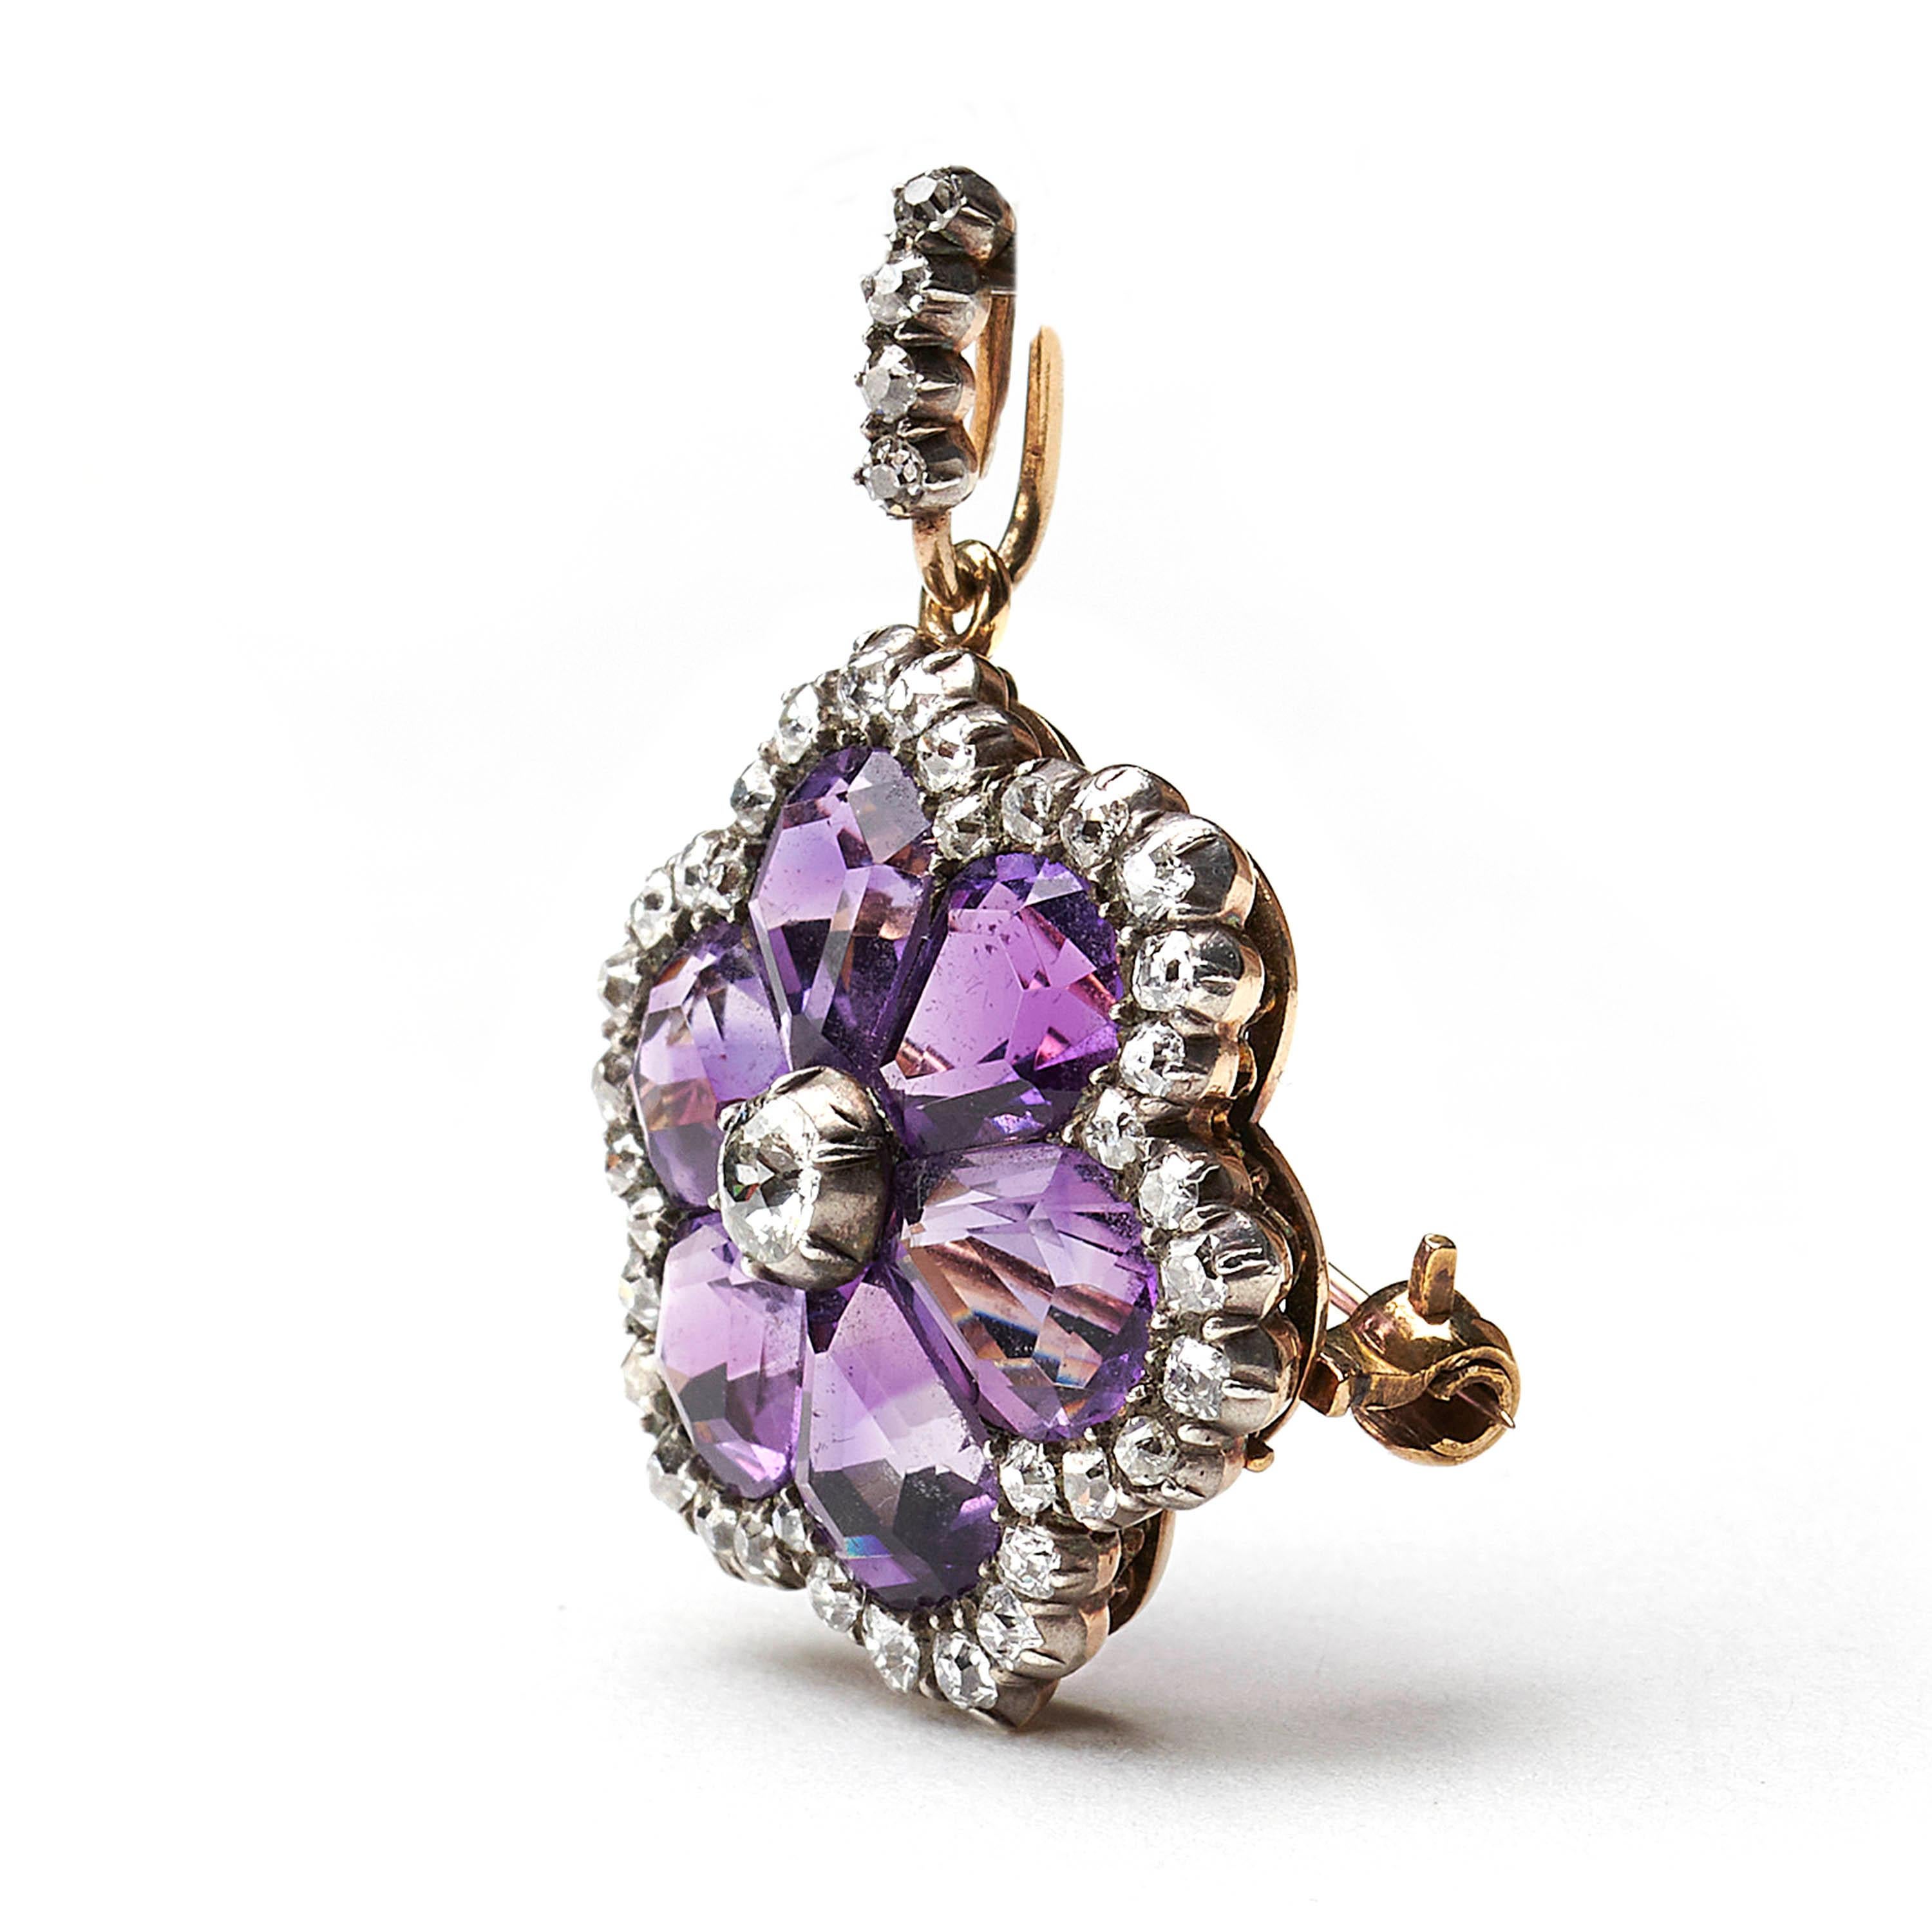 An antique, amethyst and diamond, flower cluster brooch-cum-pendant, set with a central old-cut diamond, in cut-down settings, with six, fancy, pear shaped amethysts, forming petals, surrounded by old-cut diamonds, in cut down settings, mounted in